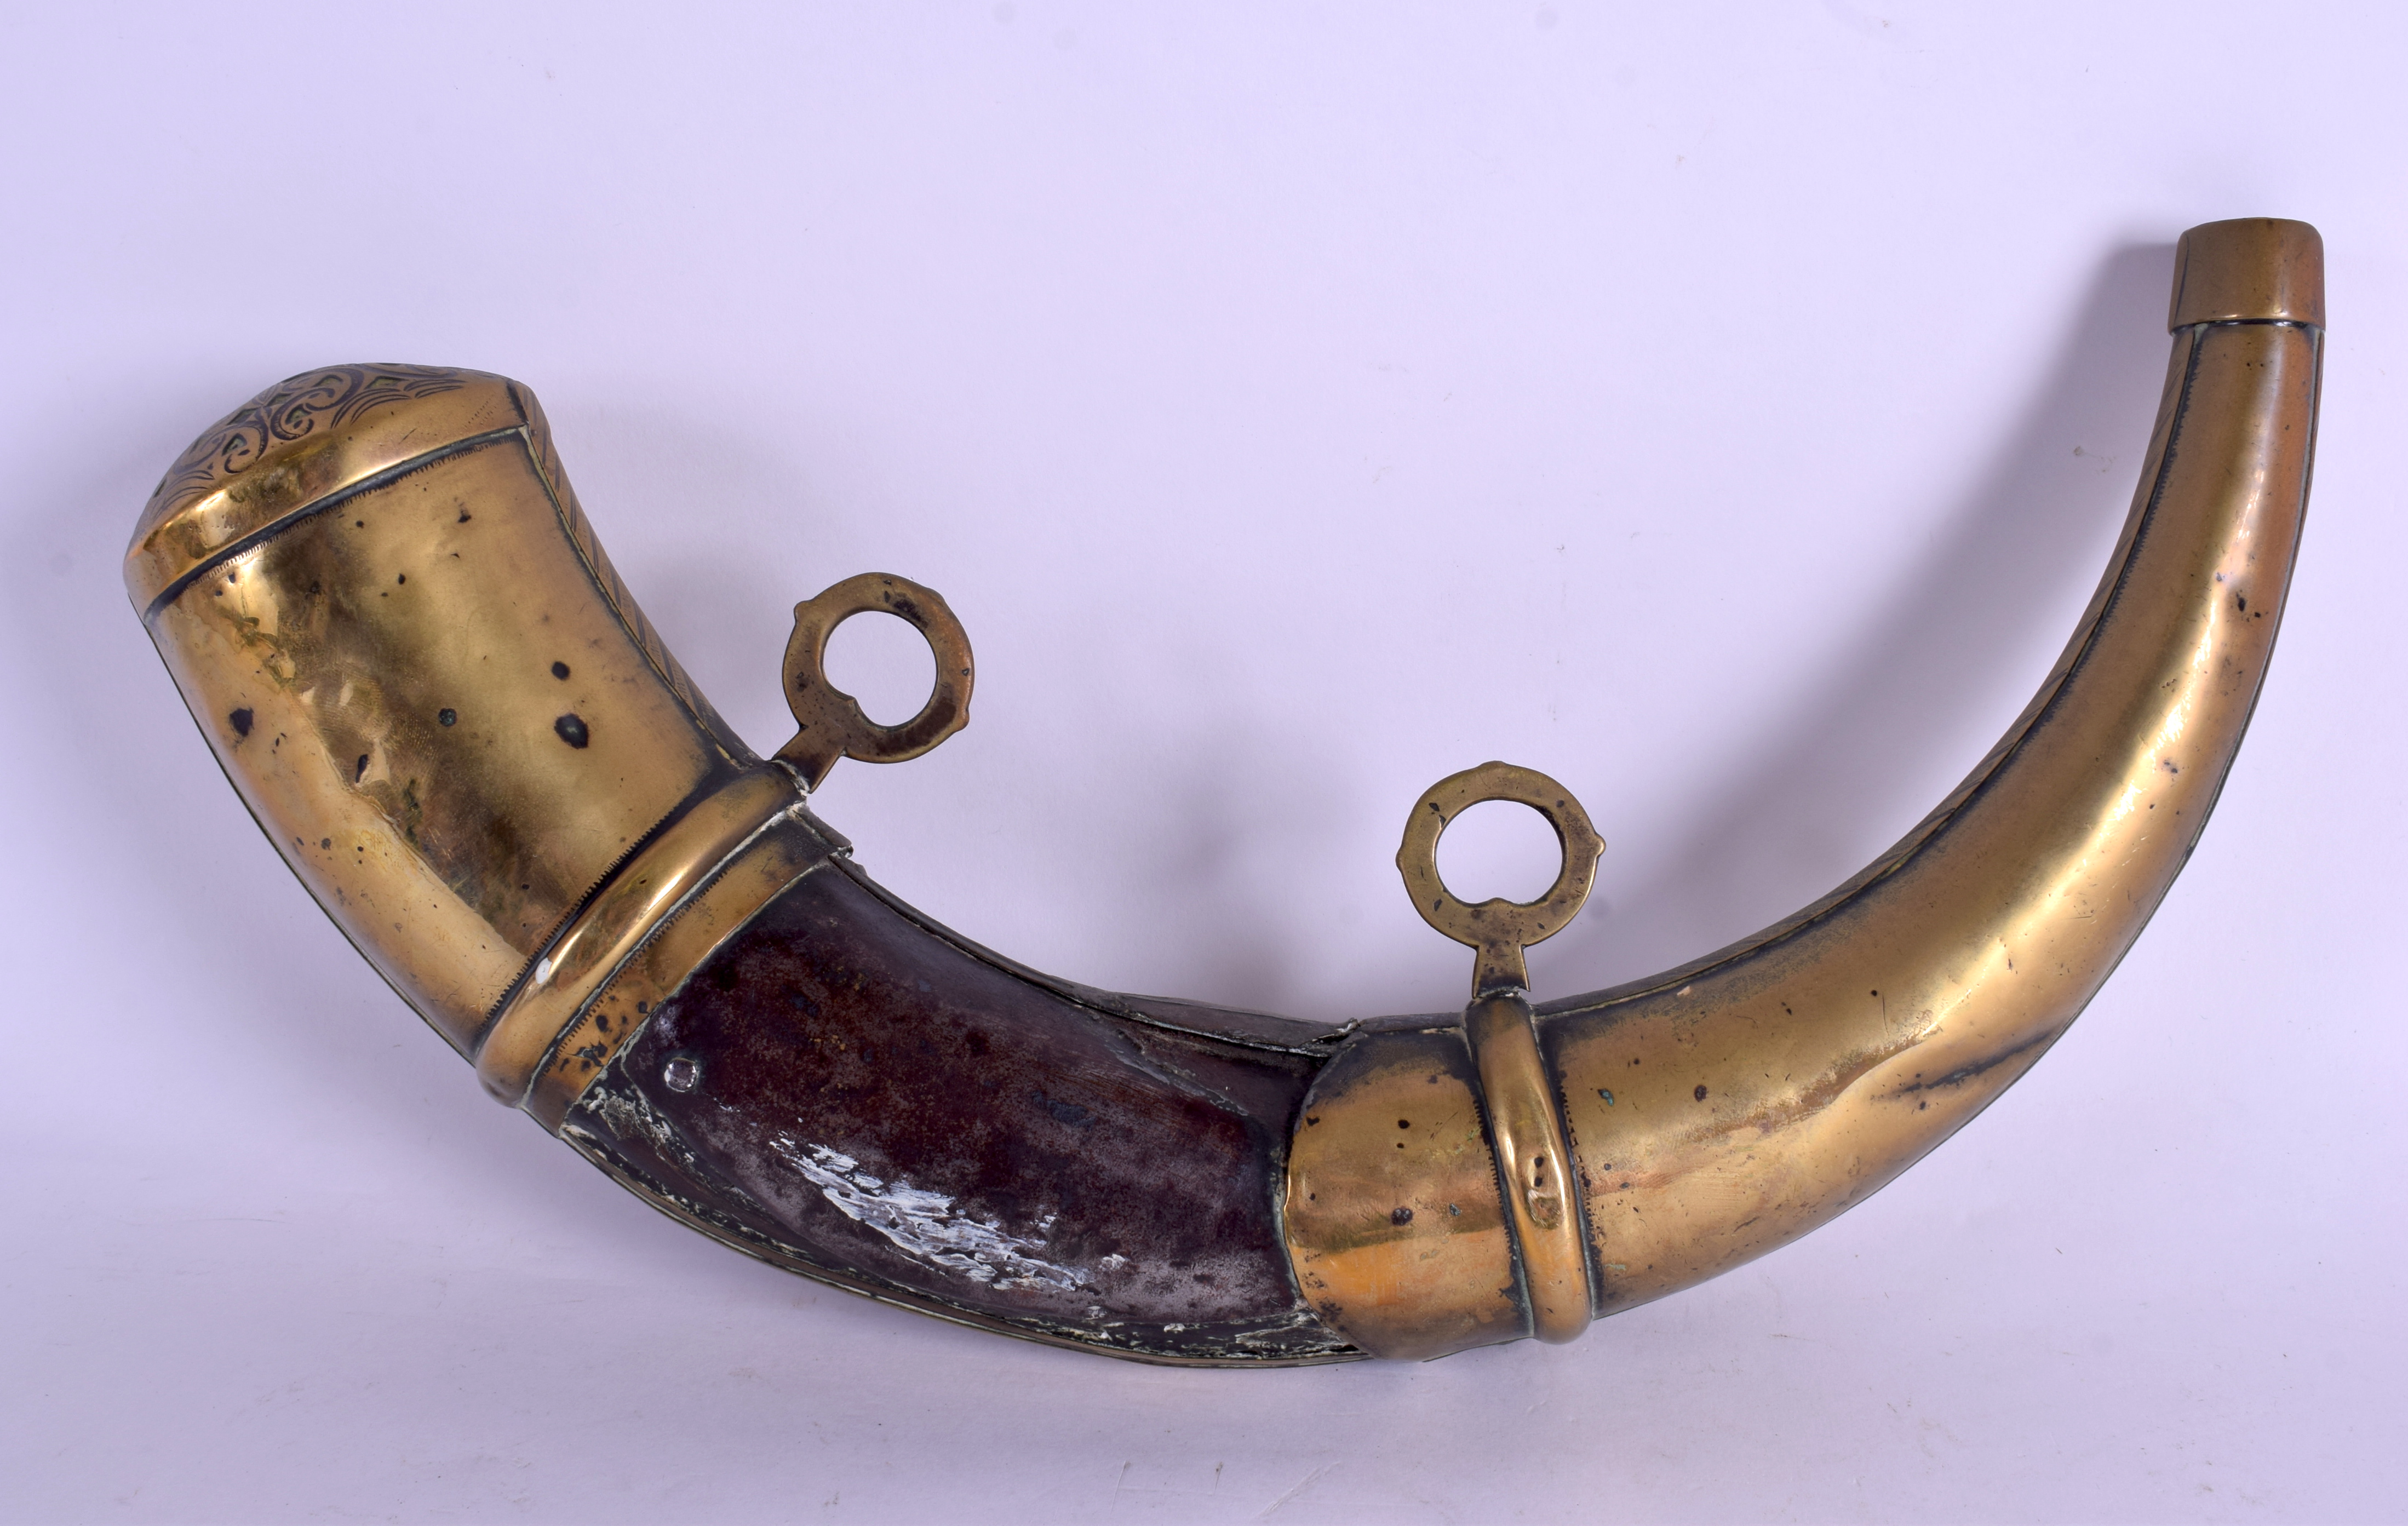 A RARE 18TH CENTURY MIDDLE EASTERN MILITARY POWDER HORN with brass mounts. 33 cm x 20 cm. - Image 2 of 4